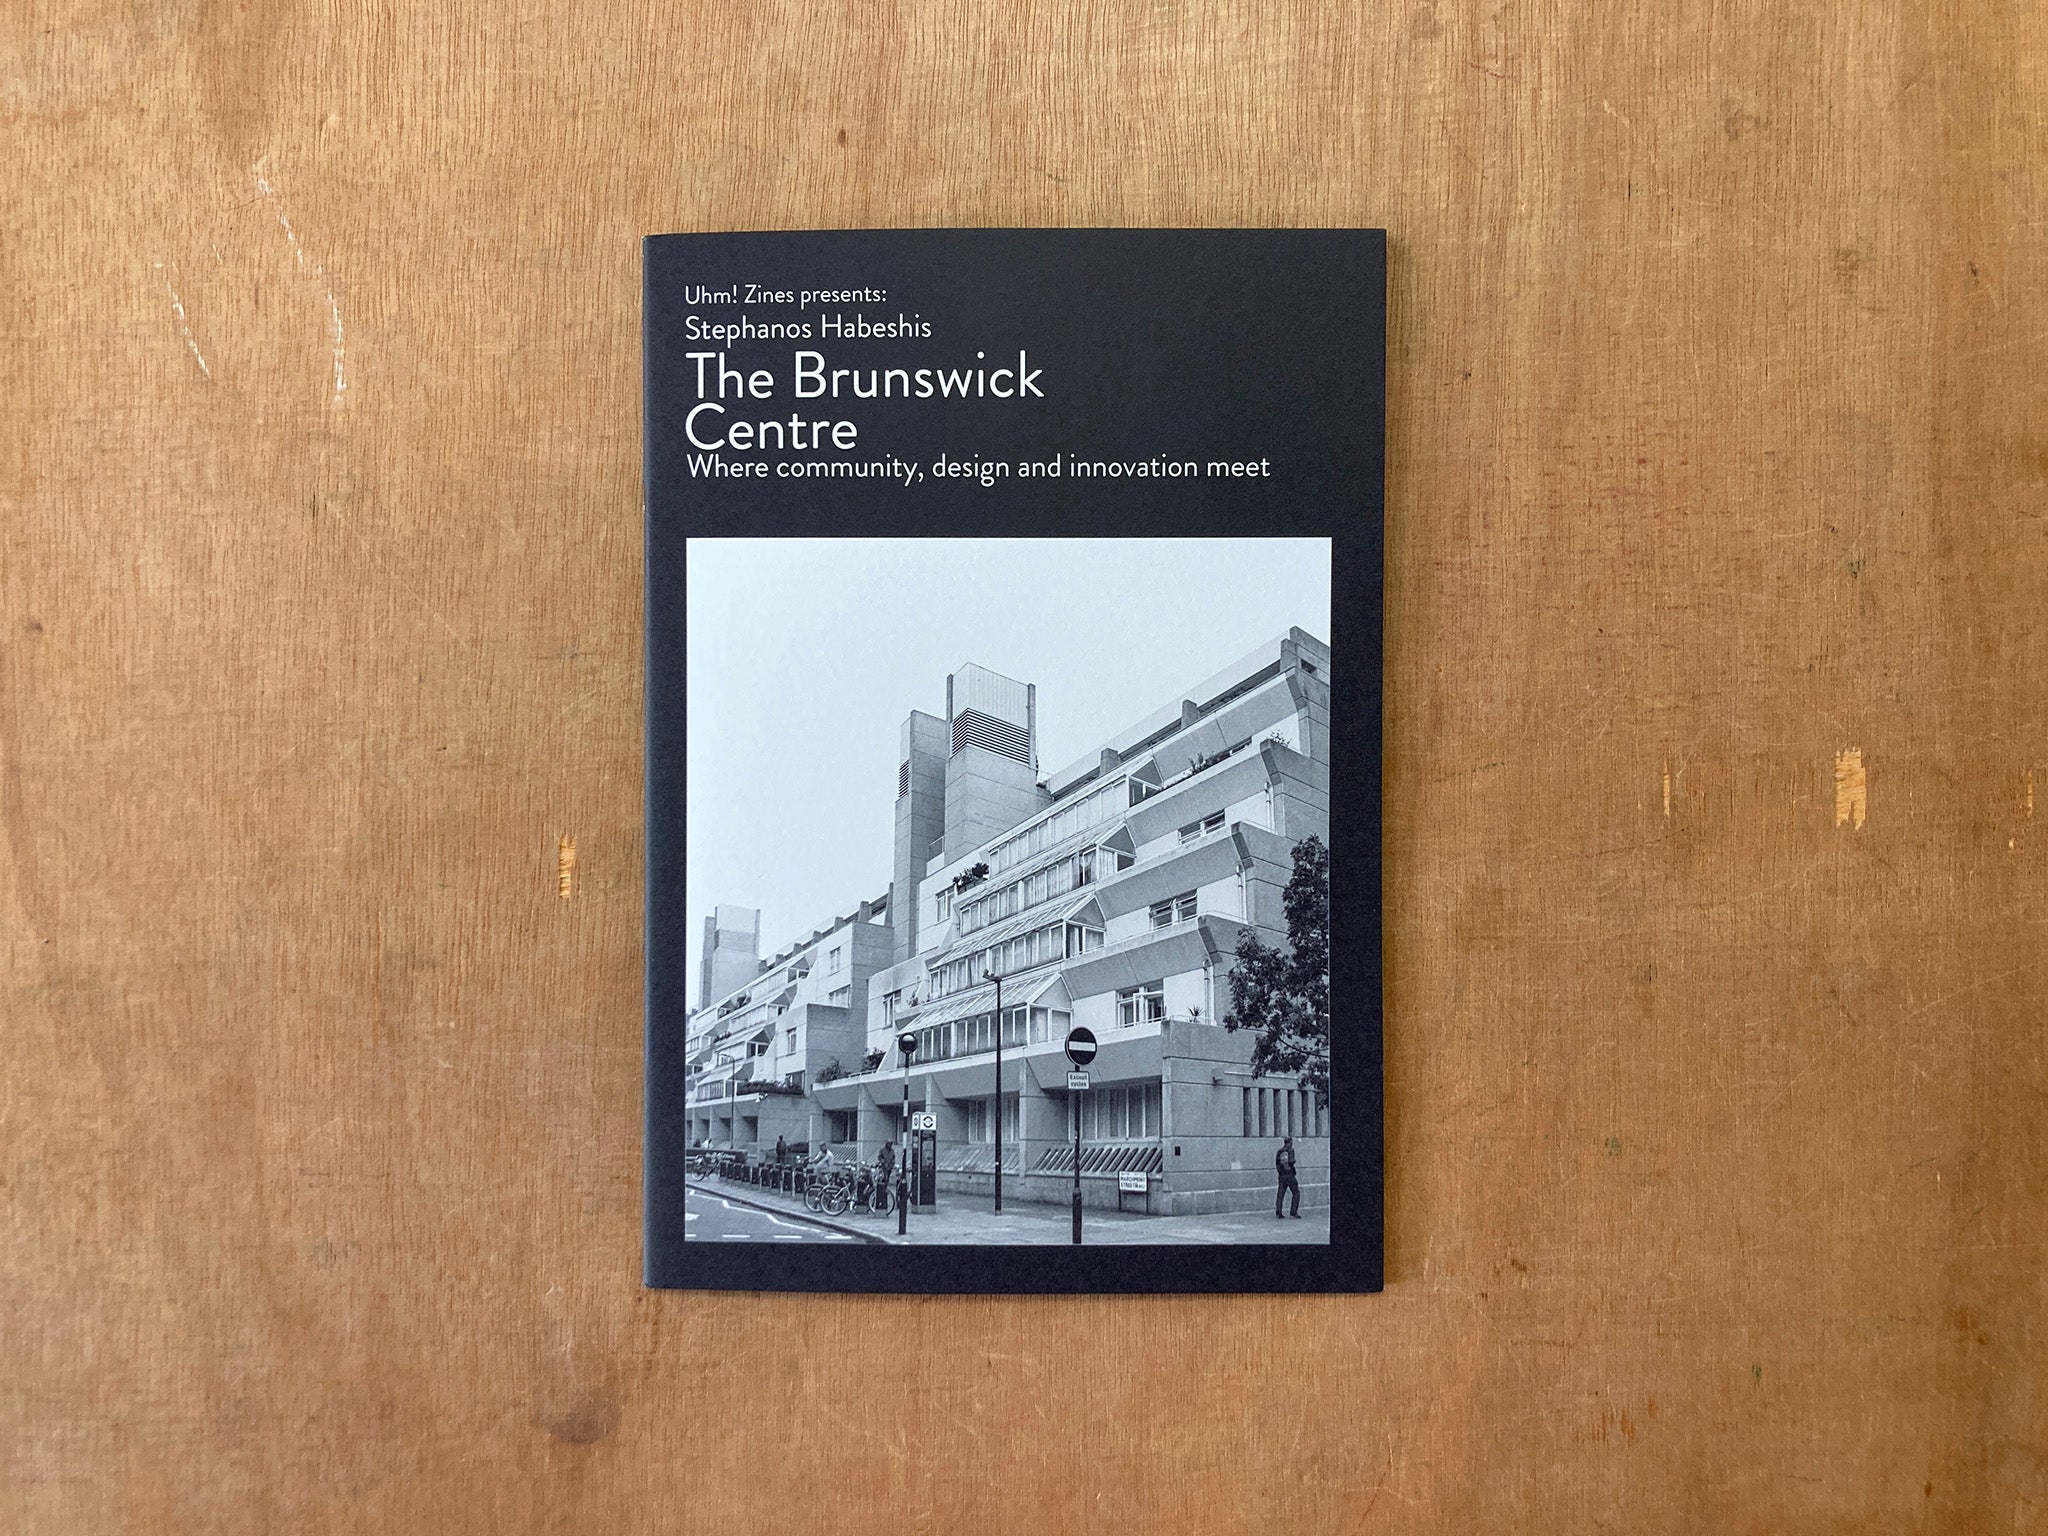 THE BRUNSWICK CENTRE: WHERE COMMUNITY, DESIGN AND INNOVATION MEET by Stephanos Habeshis